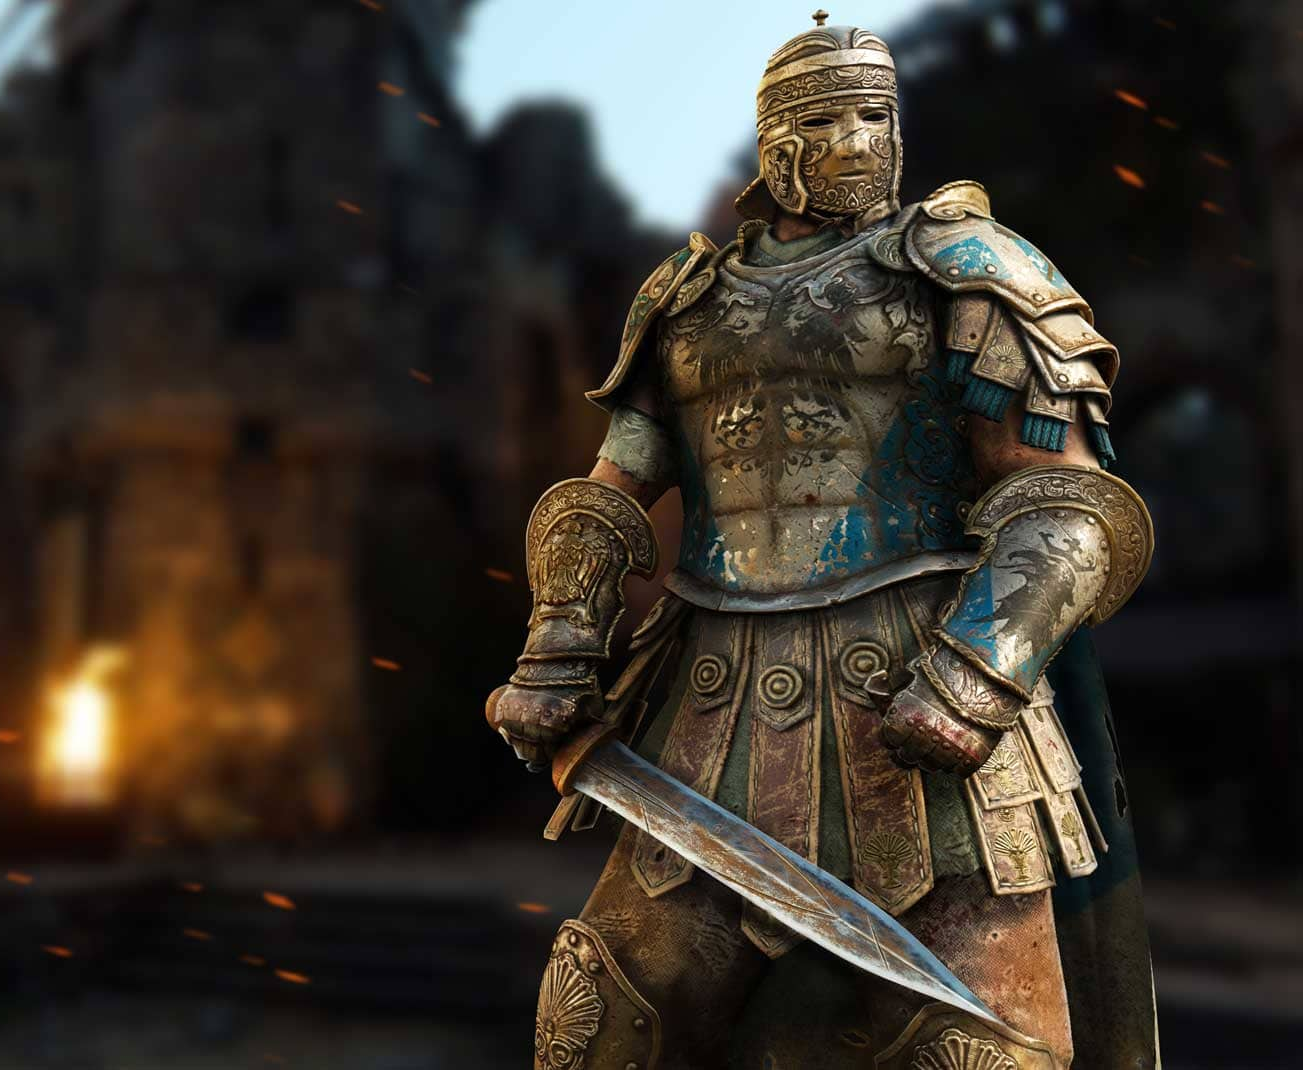 centurion for honor download free